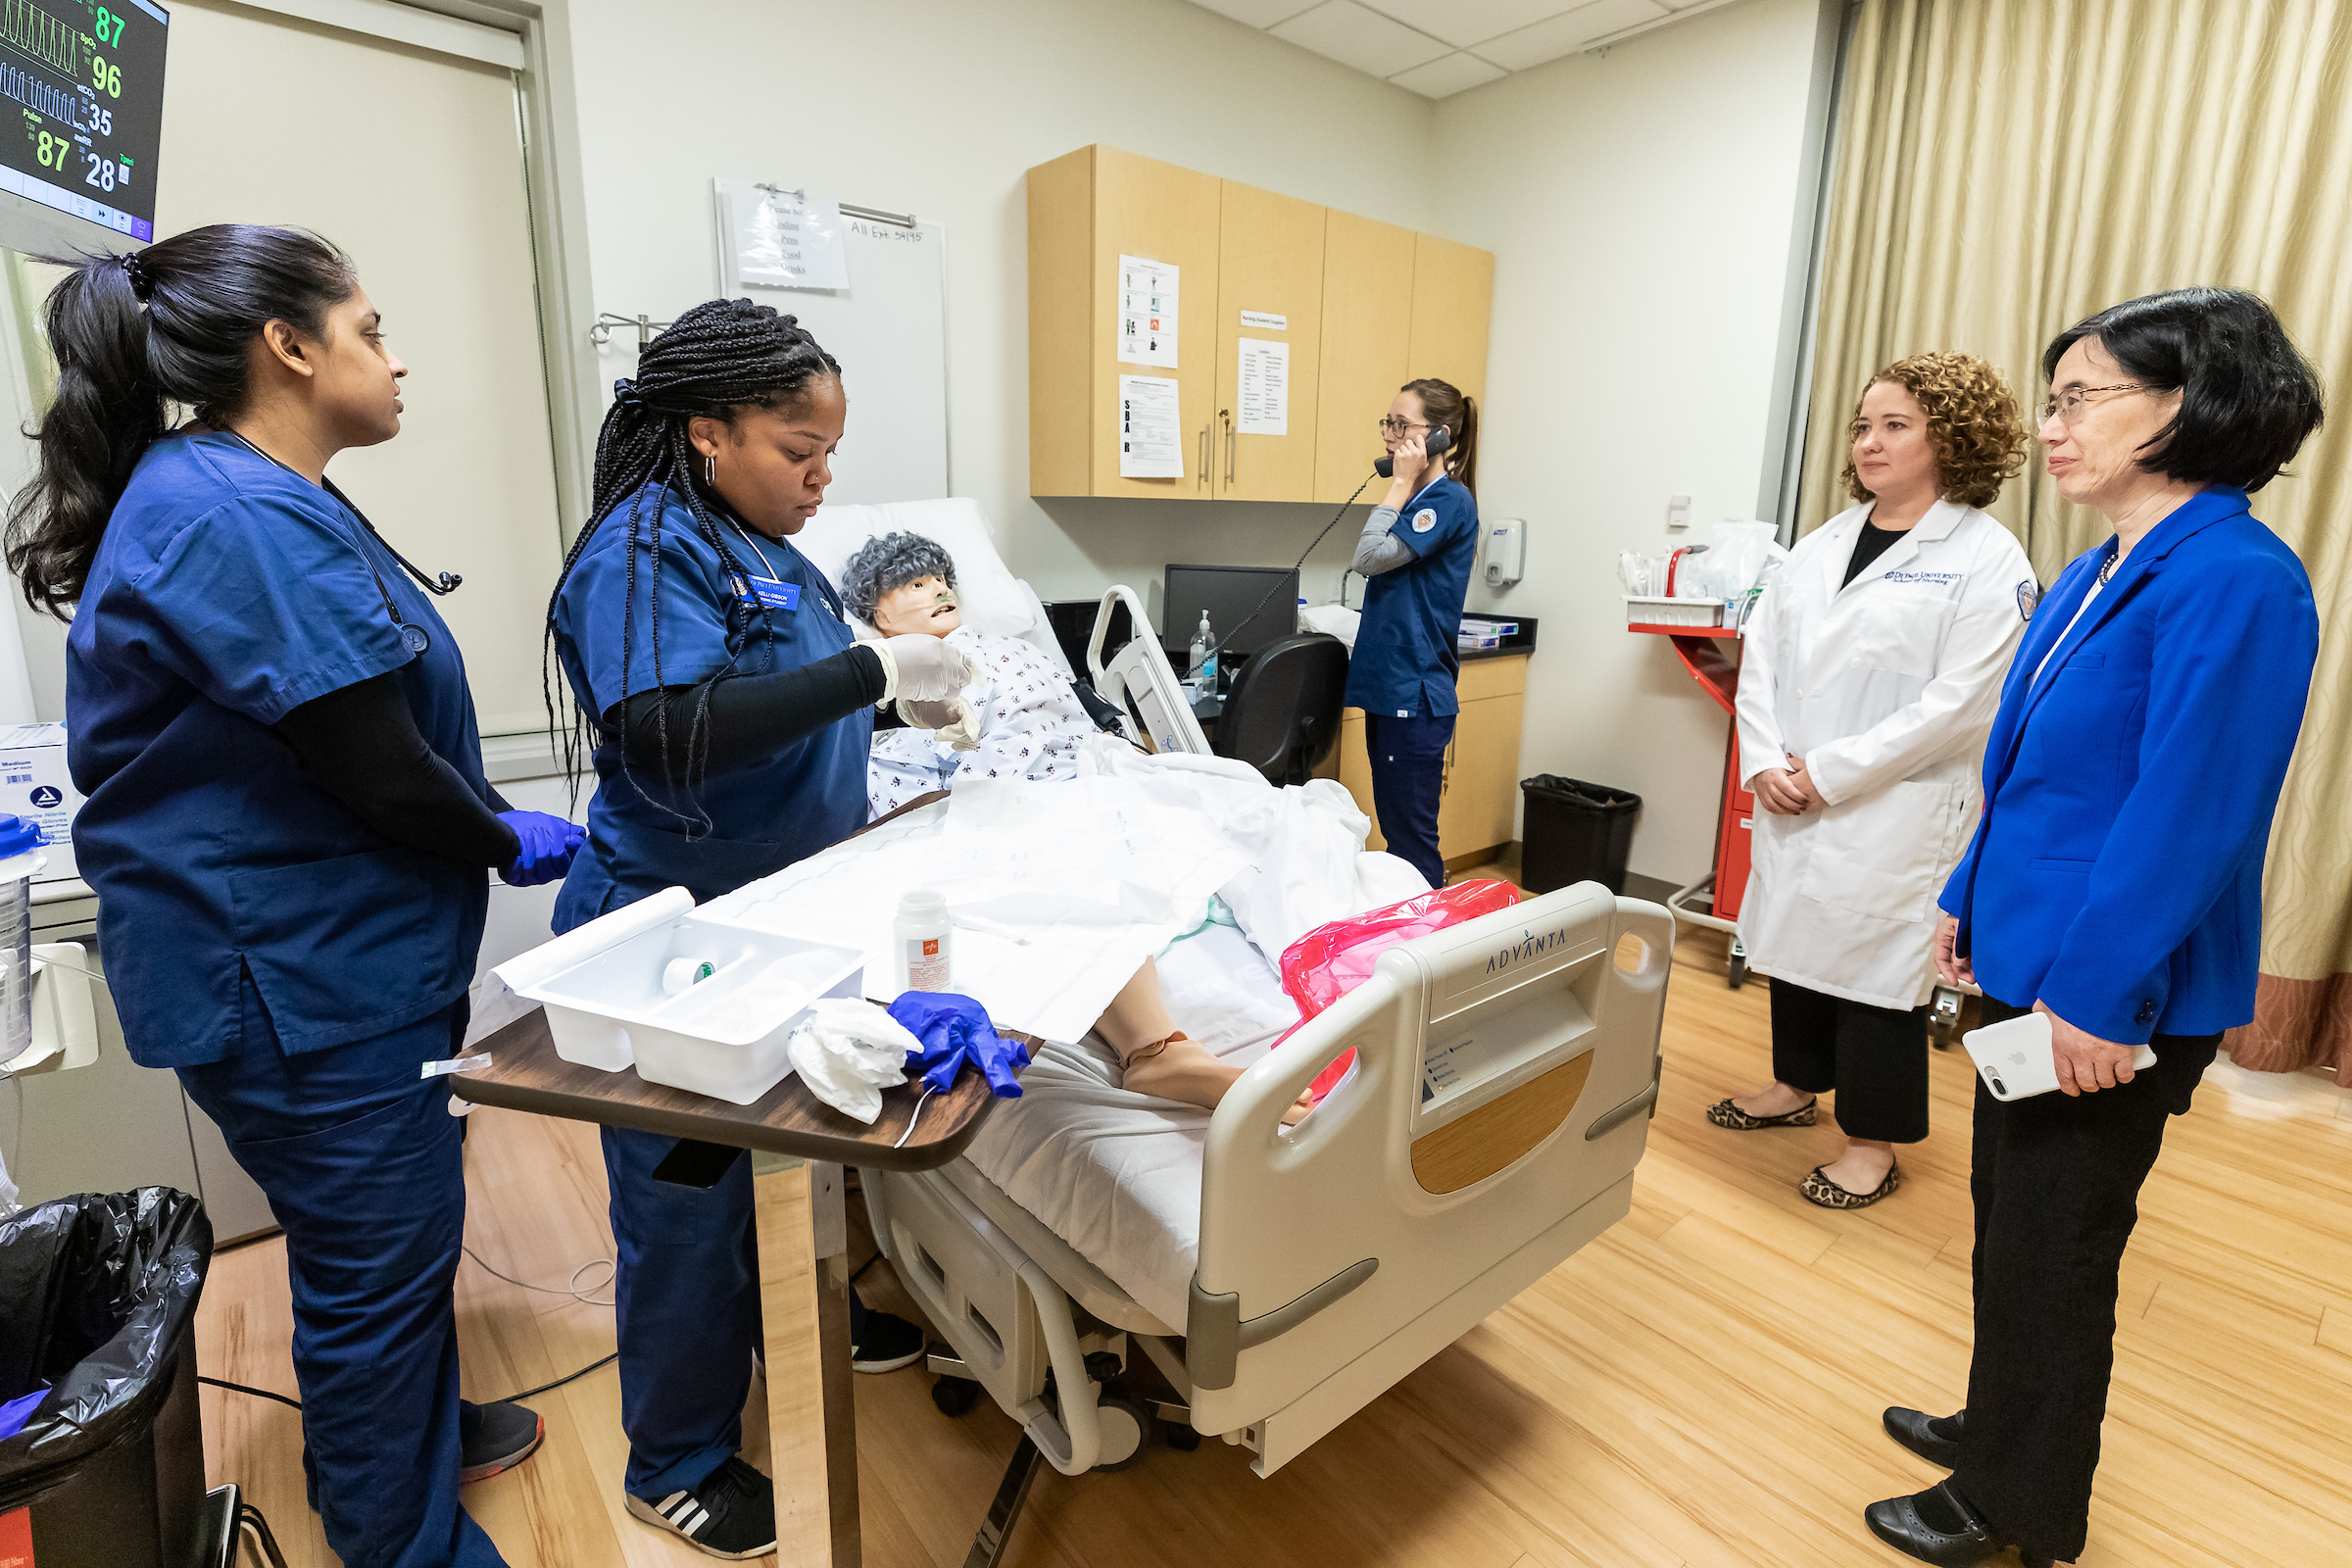 Student nurses work in a simulation lab at DePaul